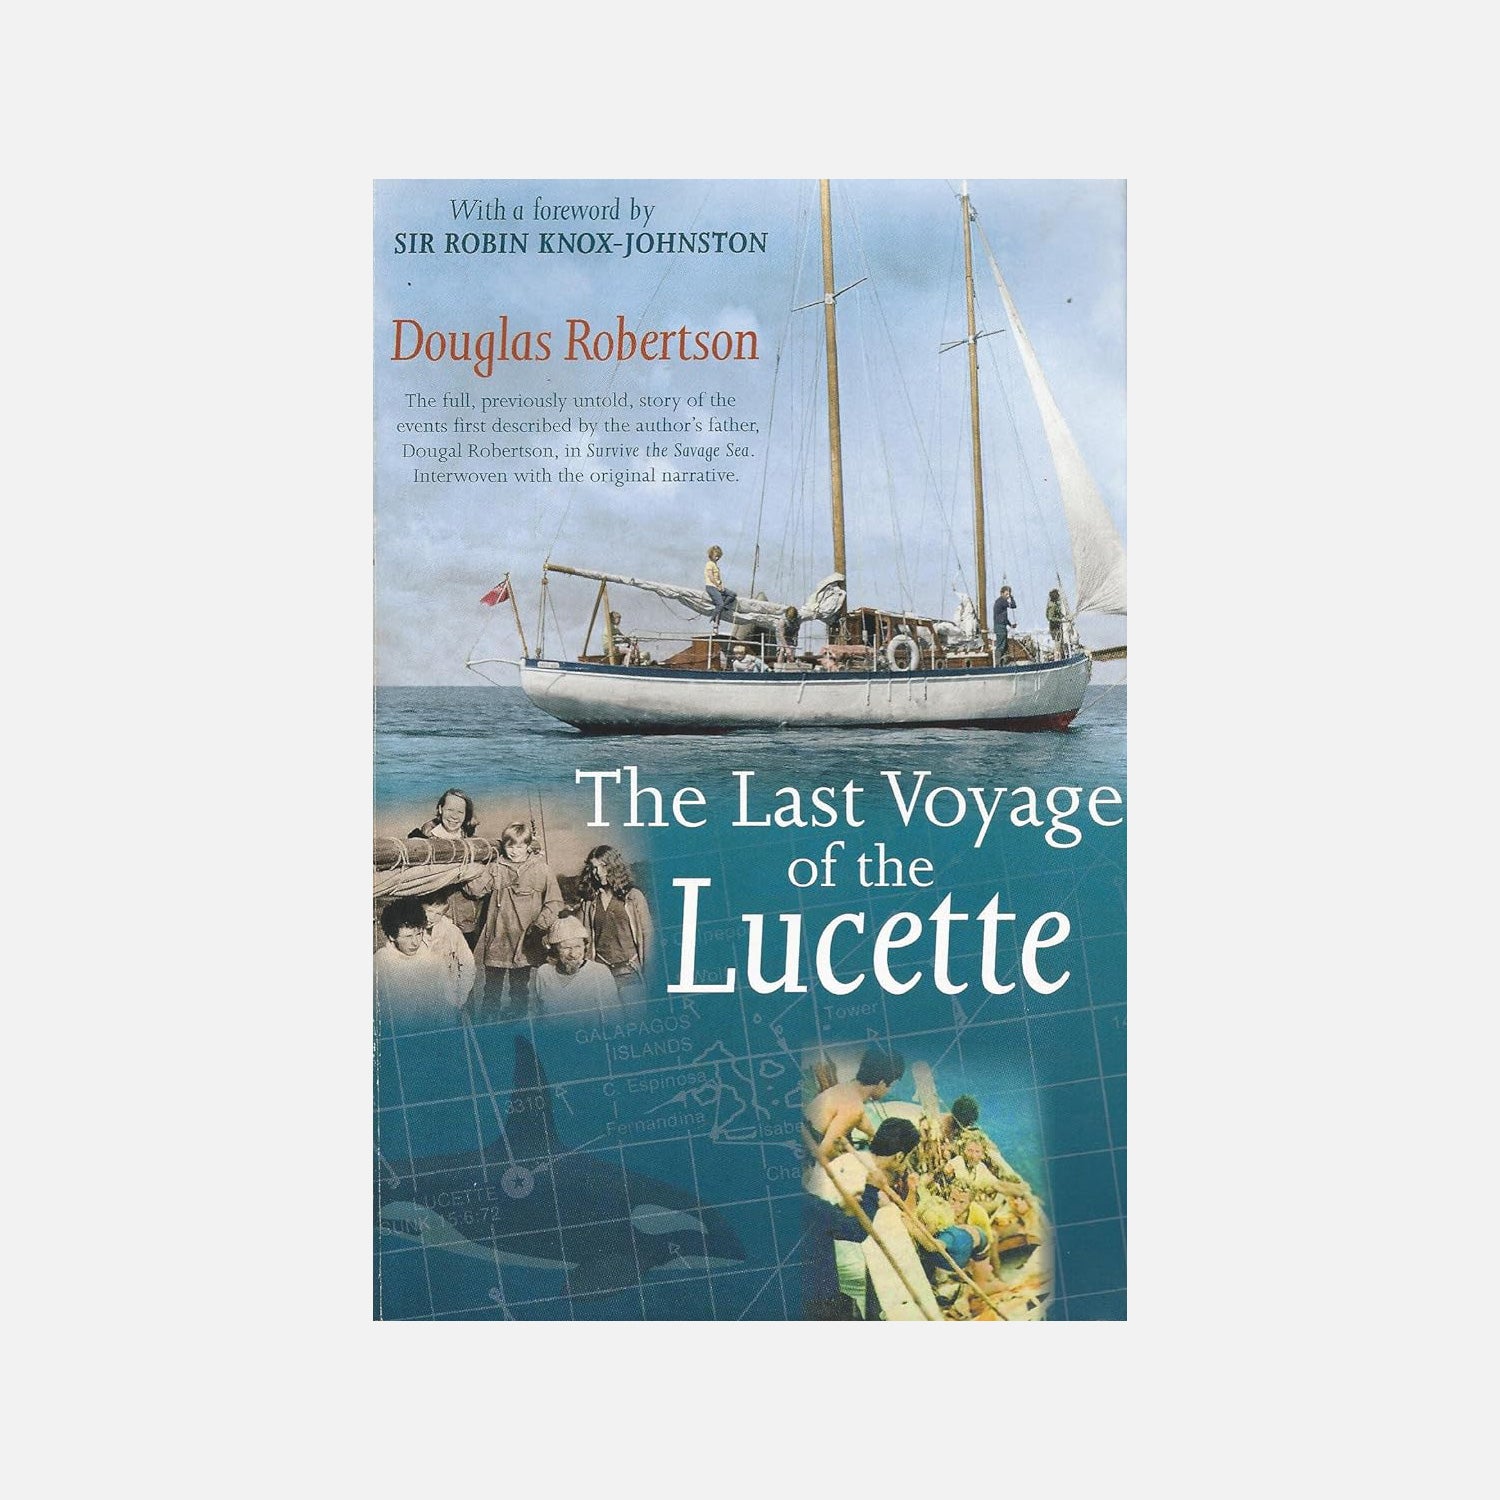 A scan of the front cover of the book The Last Voyage of the Lucette by Douglas Robertson. The cover has a picture of the family on the boat at sea.